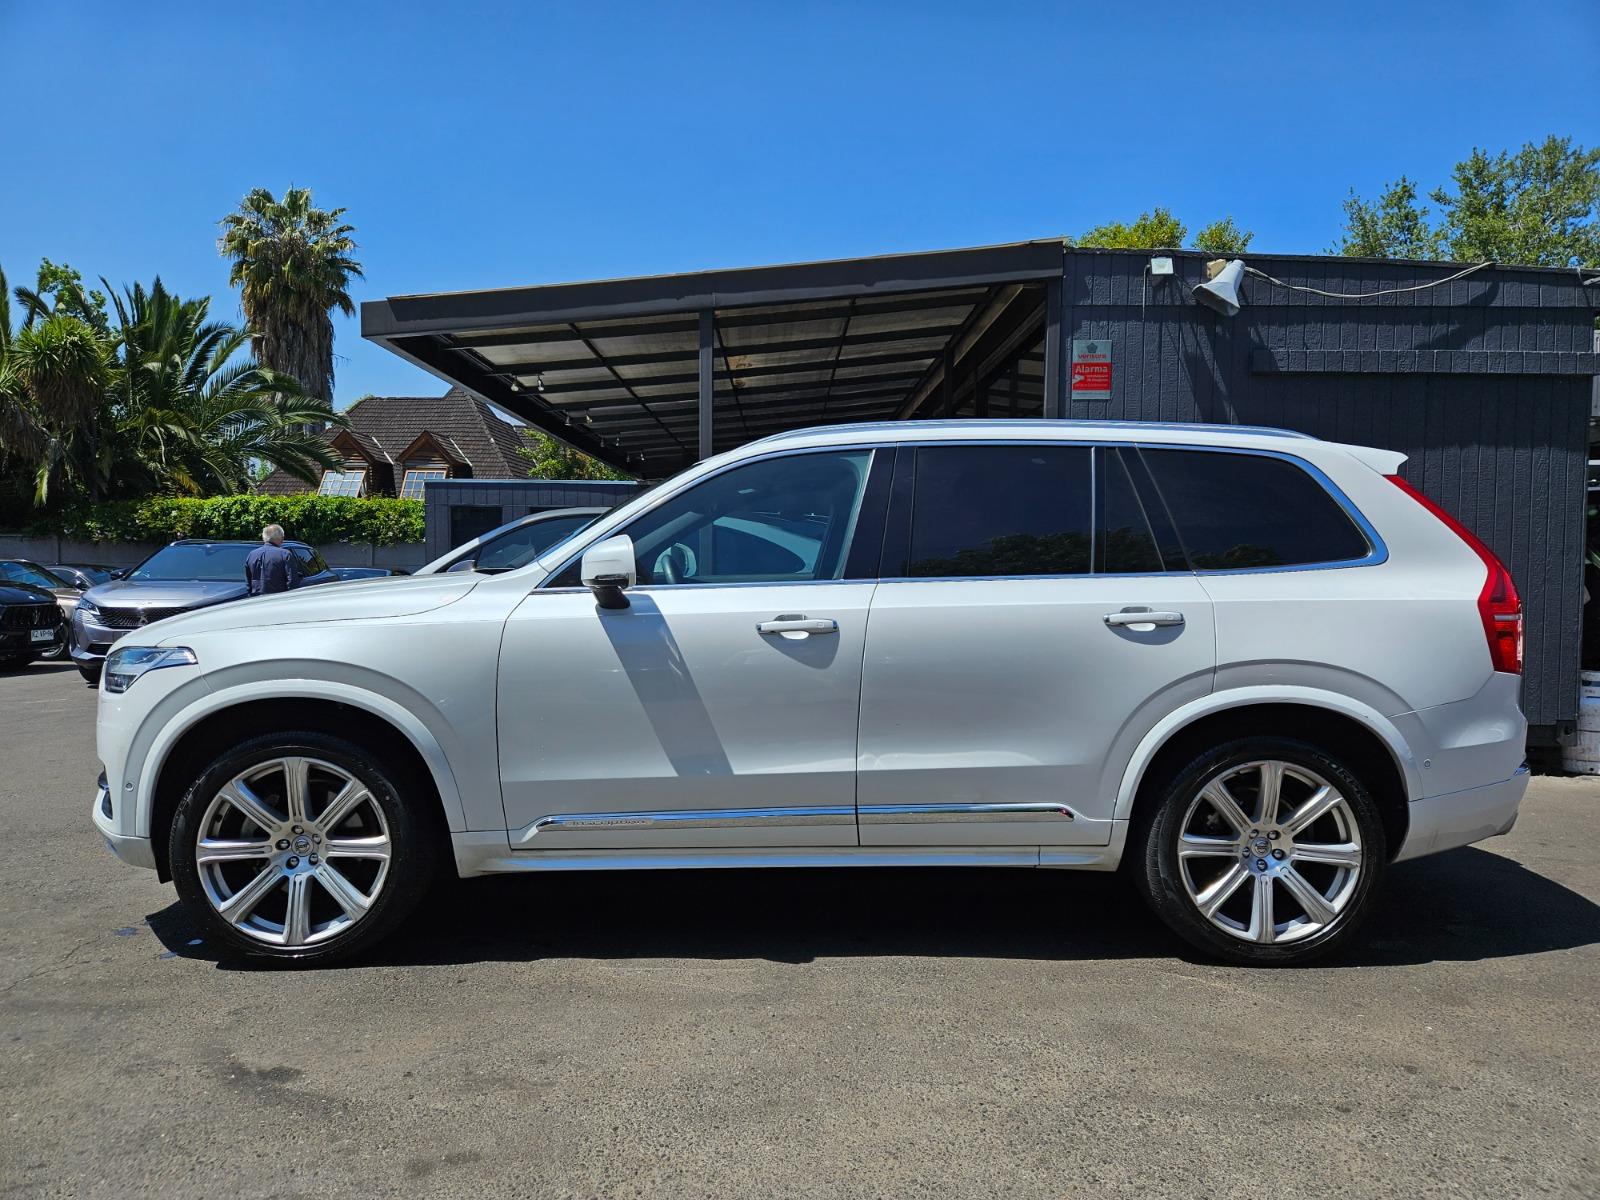 VOLVO XC90 D5 INSCRIPTION PLUS 4WD 2020 FULL EQUIPO, IMPECABLE - FULL MOTOR